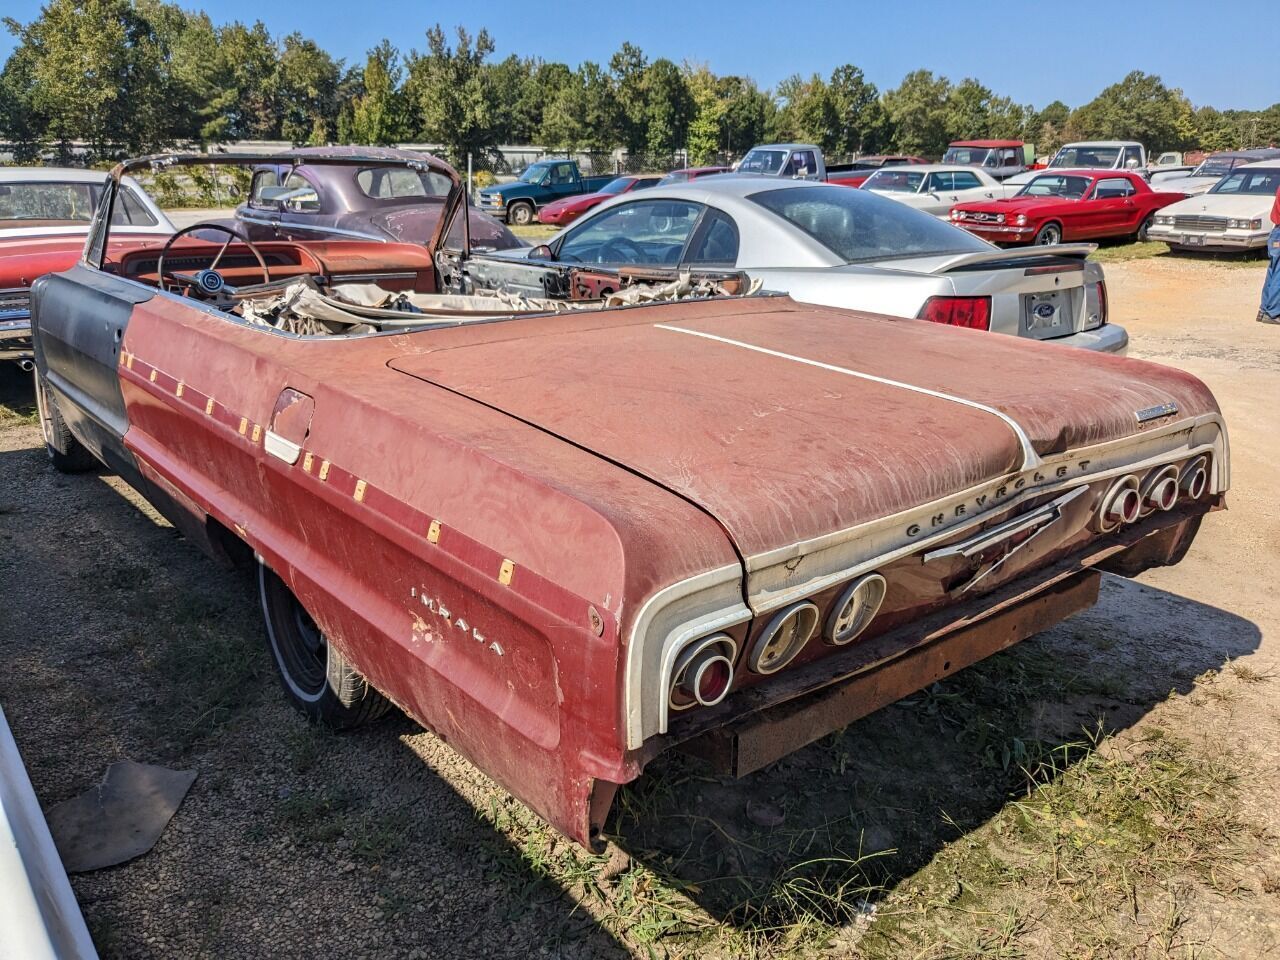 1964 Chevy Impala SS Convertible Abandoned in a Barn Mid-Restoration ...